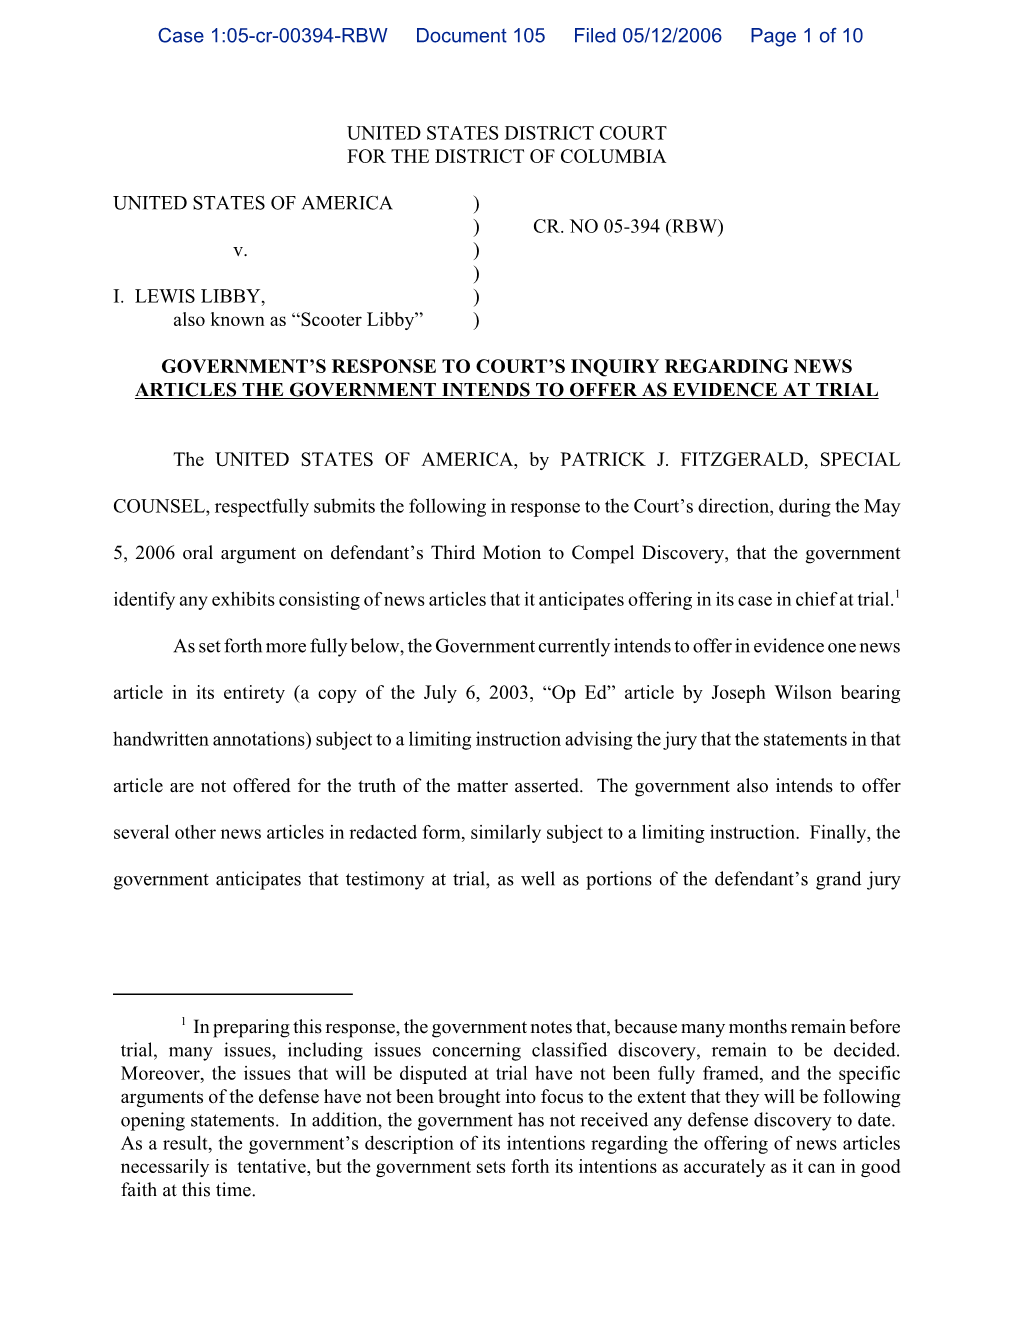 Case 1:05-Cr-00394-RBW Document 105 Filed 05/12/2006 Page 1 of 10�